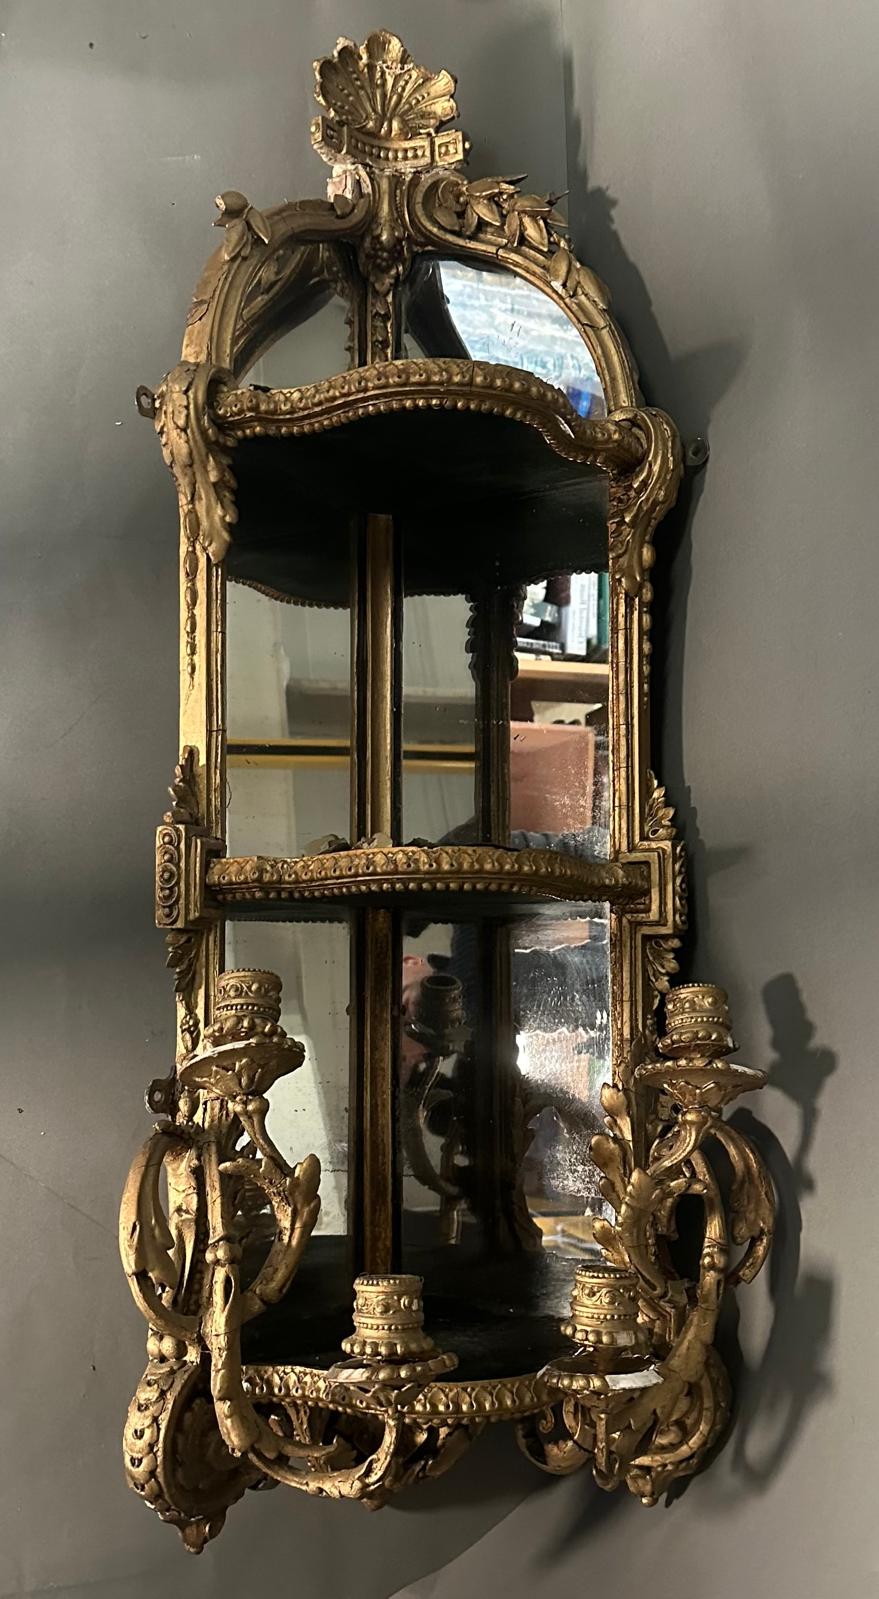 A gilt framed shelved corner mirror or girondele with two arm candle holders, two shelves and ornate